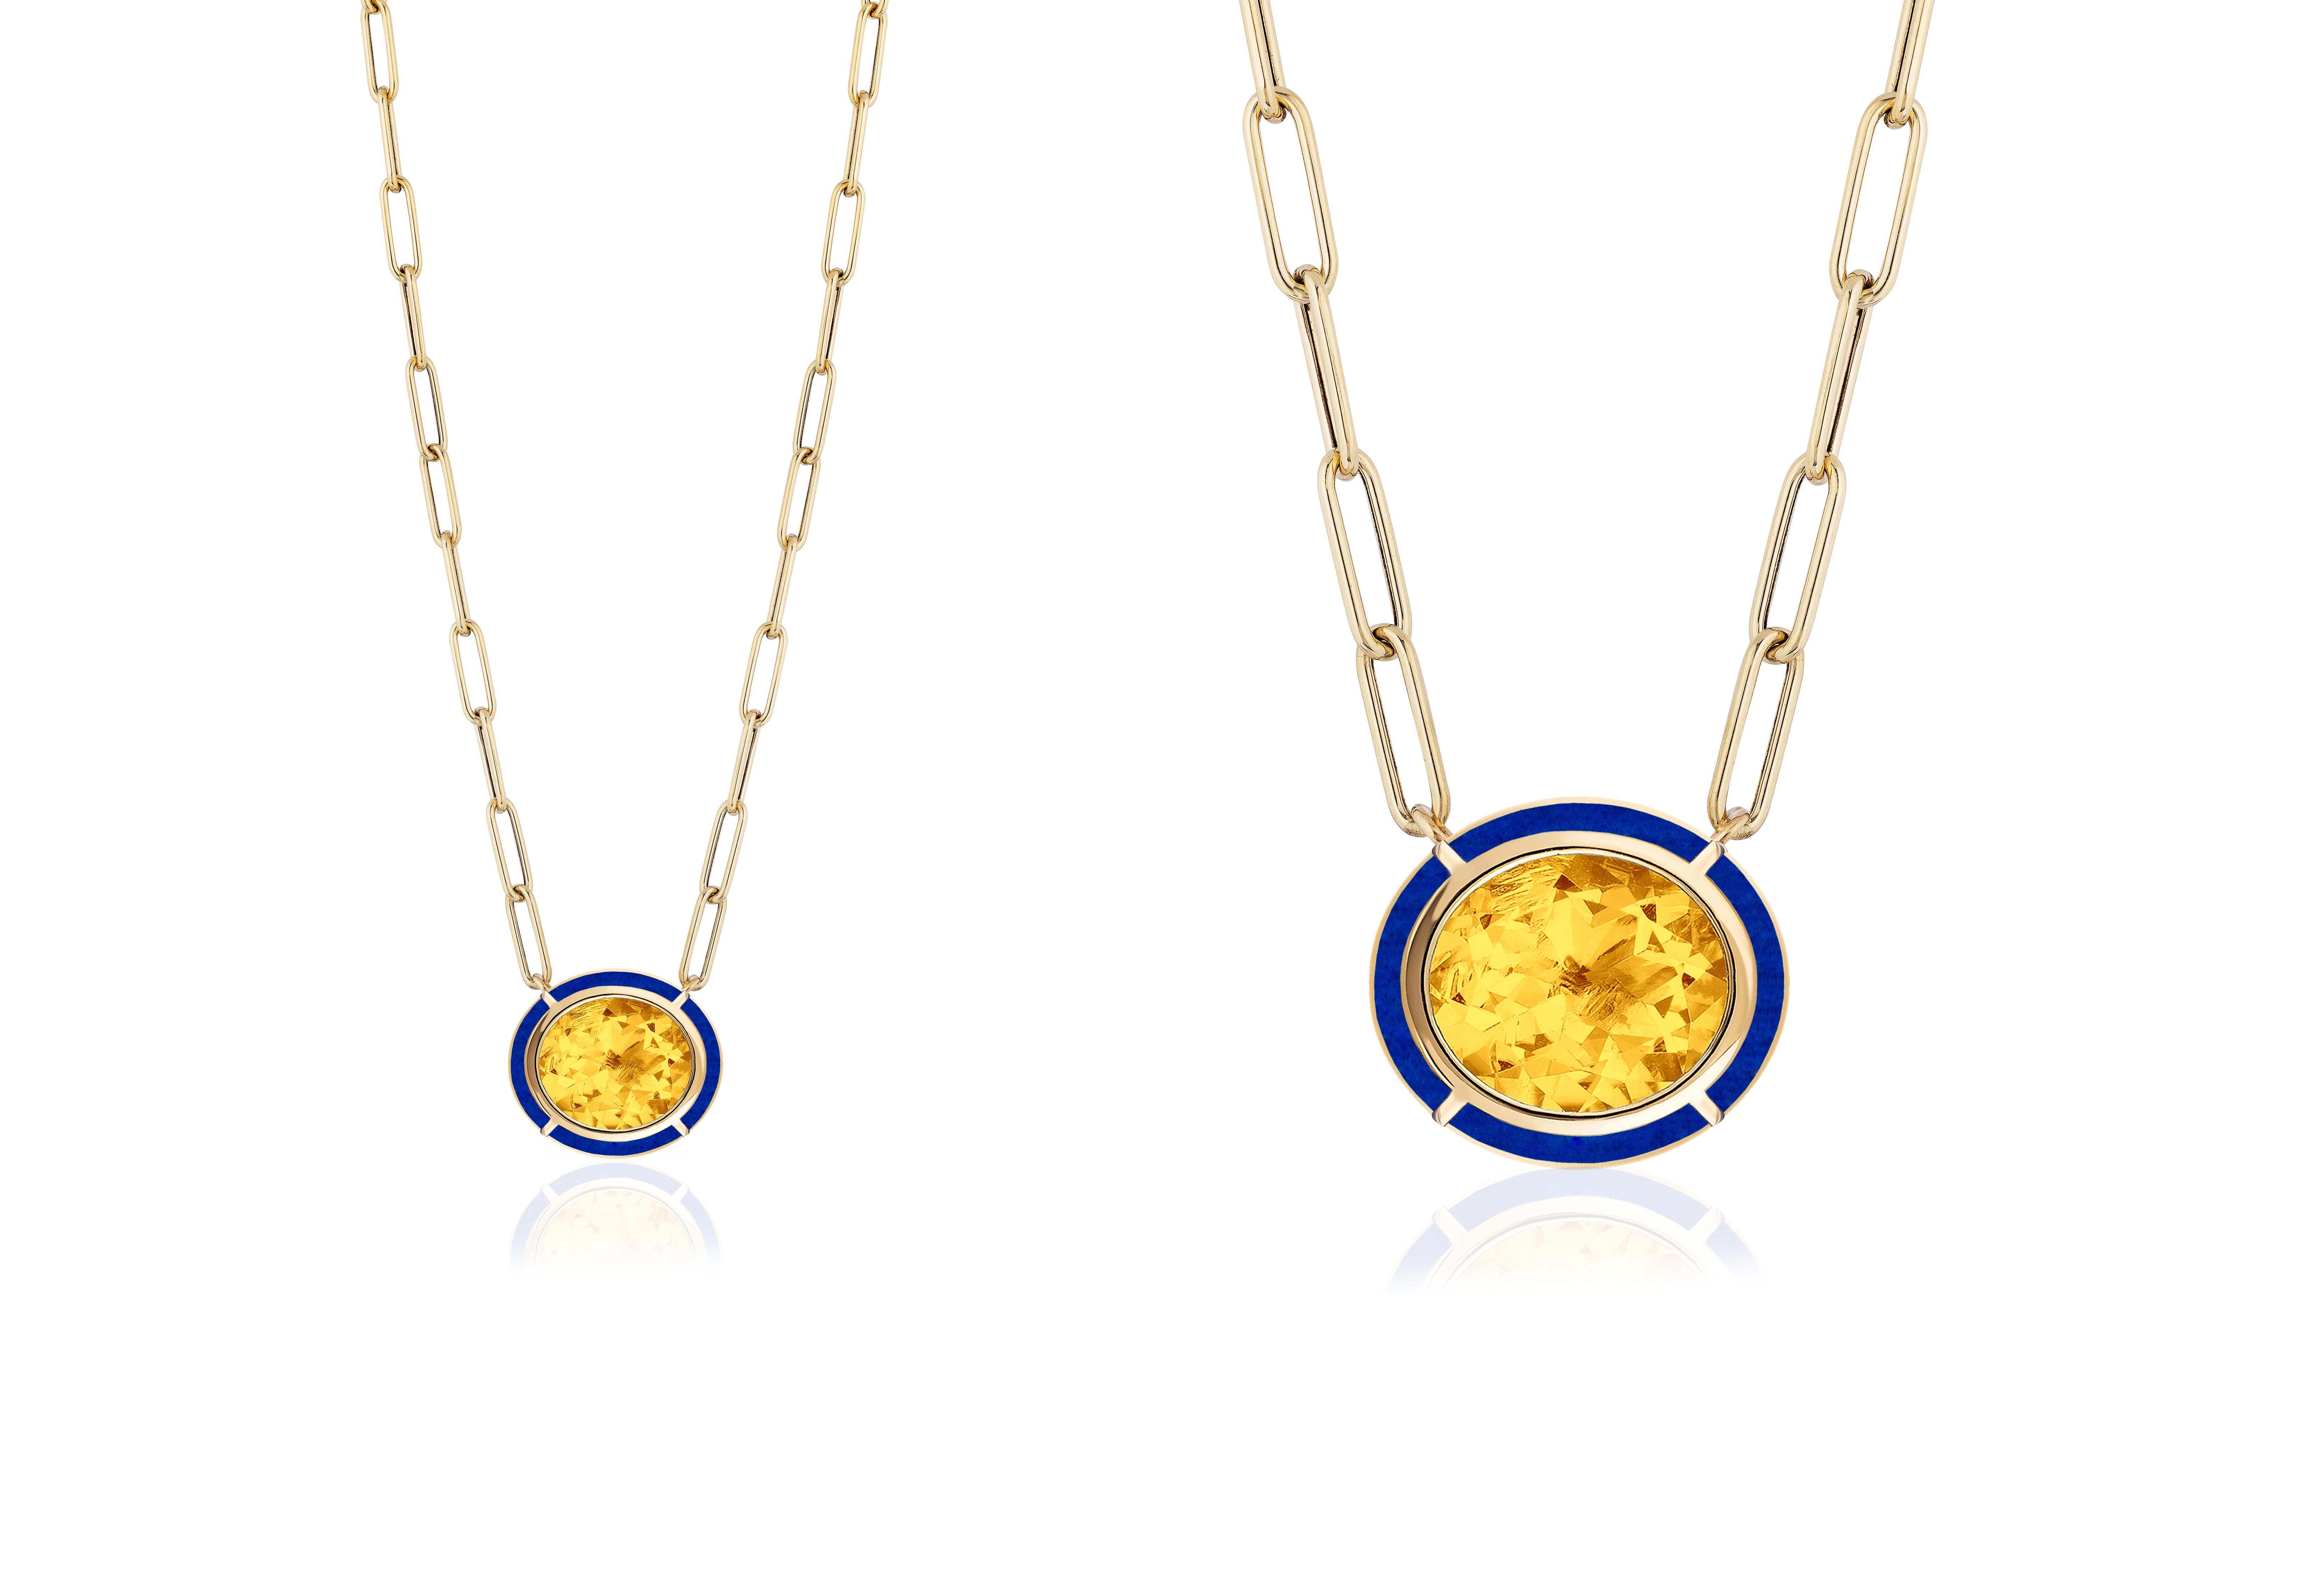 This Citrine & Lapis Lazuli Inlay Oval Pendant in 18K Yellow Gold is a stunning piece of jewelry from the 'Mélange' Collection. The pendant features an oval-shaped Citrine surrounded by a Lapis Lazuli stone, both set in 18K Yellow gold. The